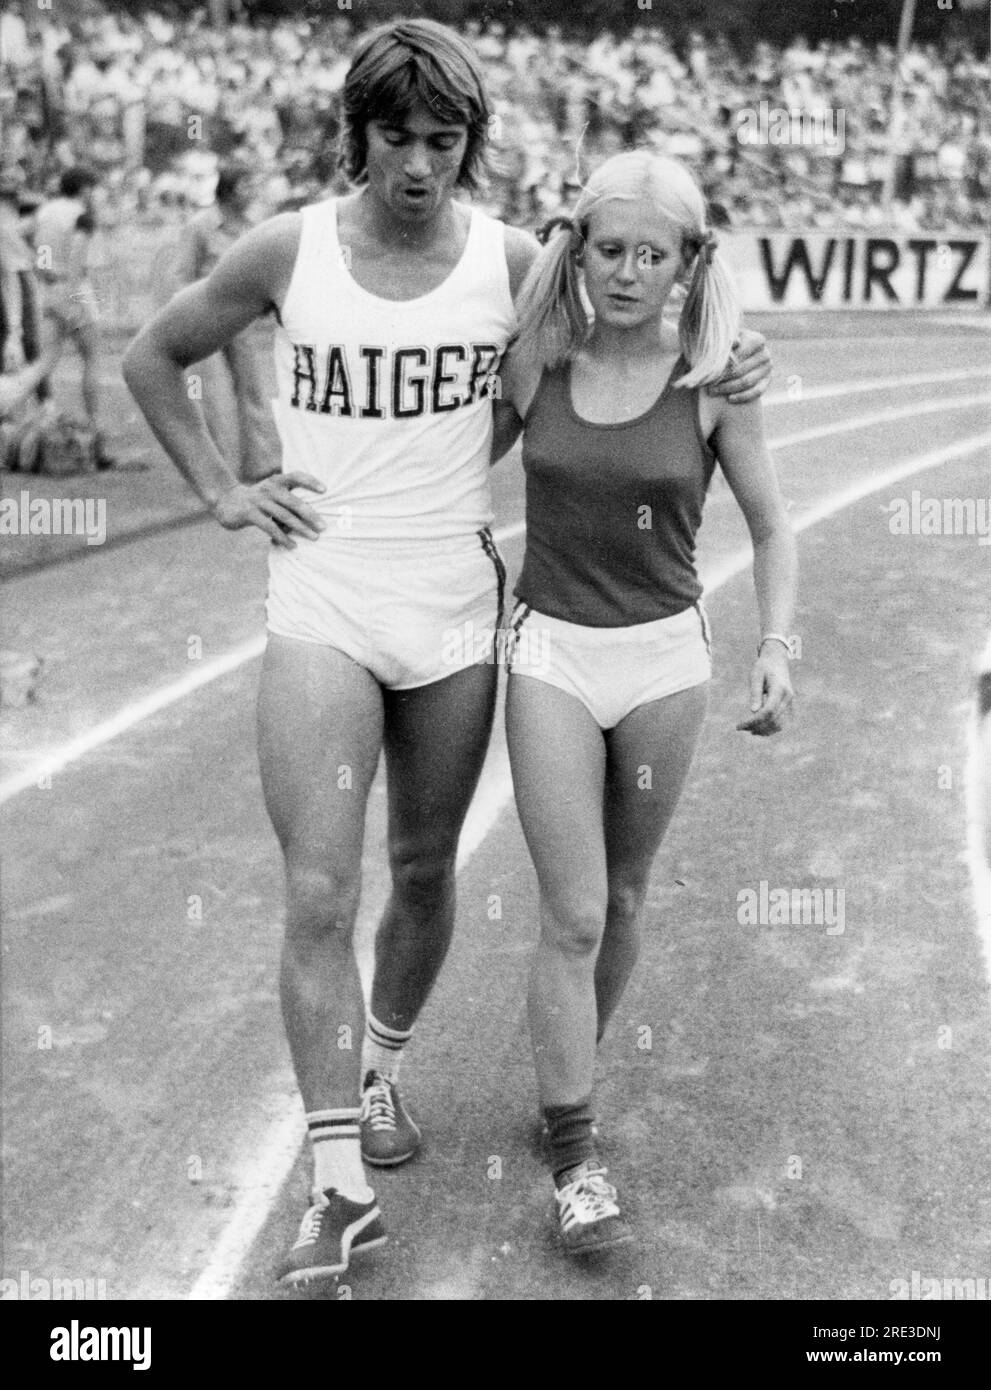 Wellmann, Paul-Heinz, * 31.3.1952, German middle-distance runner, with Ellen Tittel, early 1970s, ADDITIONAL-RIGHTS-CLEARANCE-INFO-NOT-AVAILABLE Stock Photo